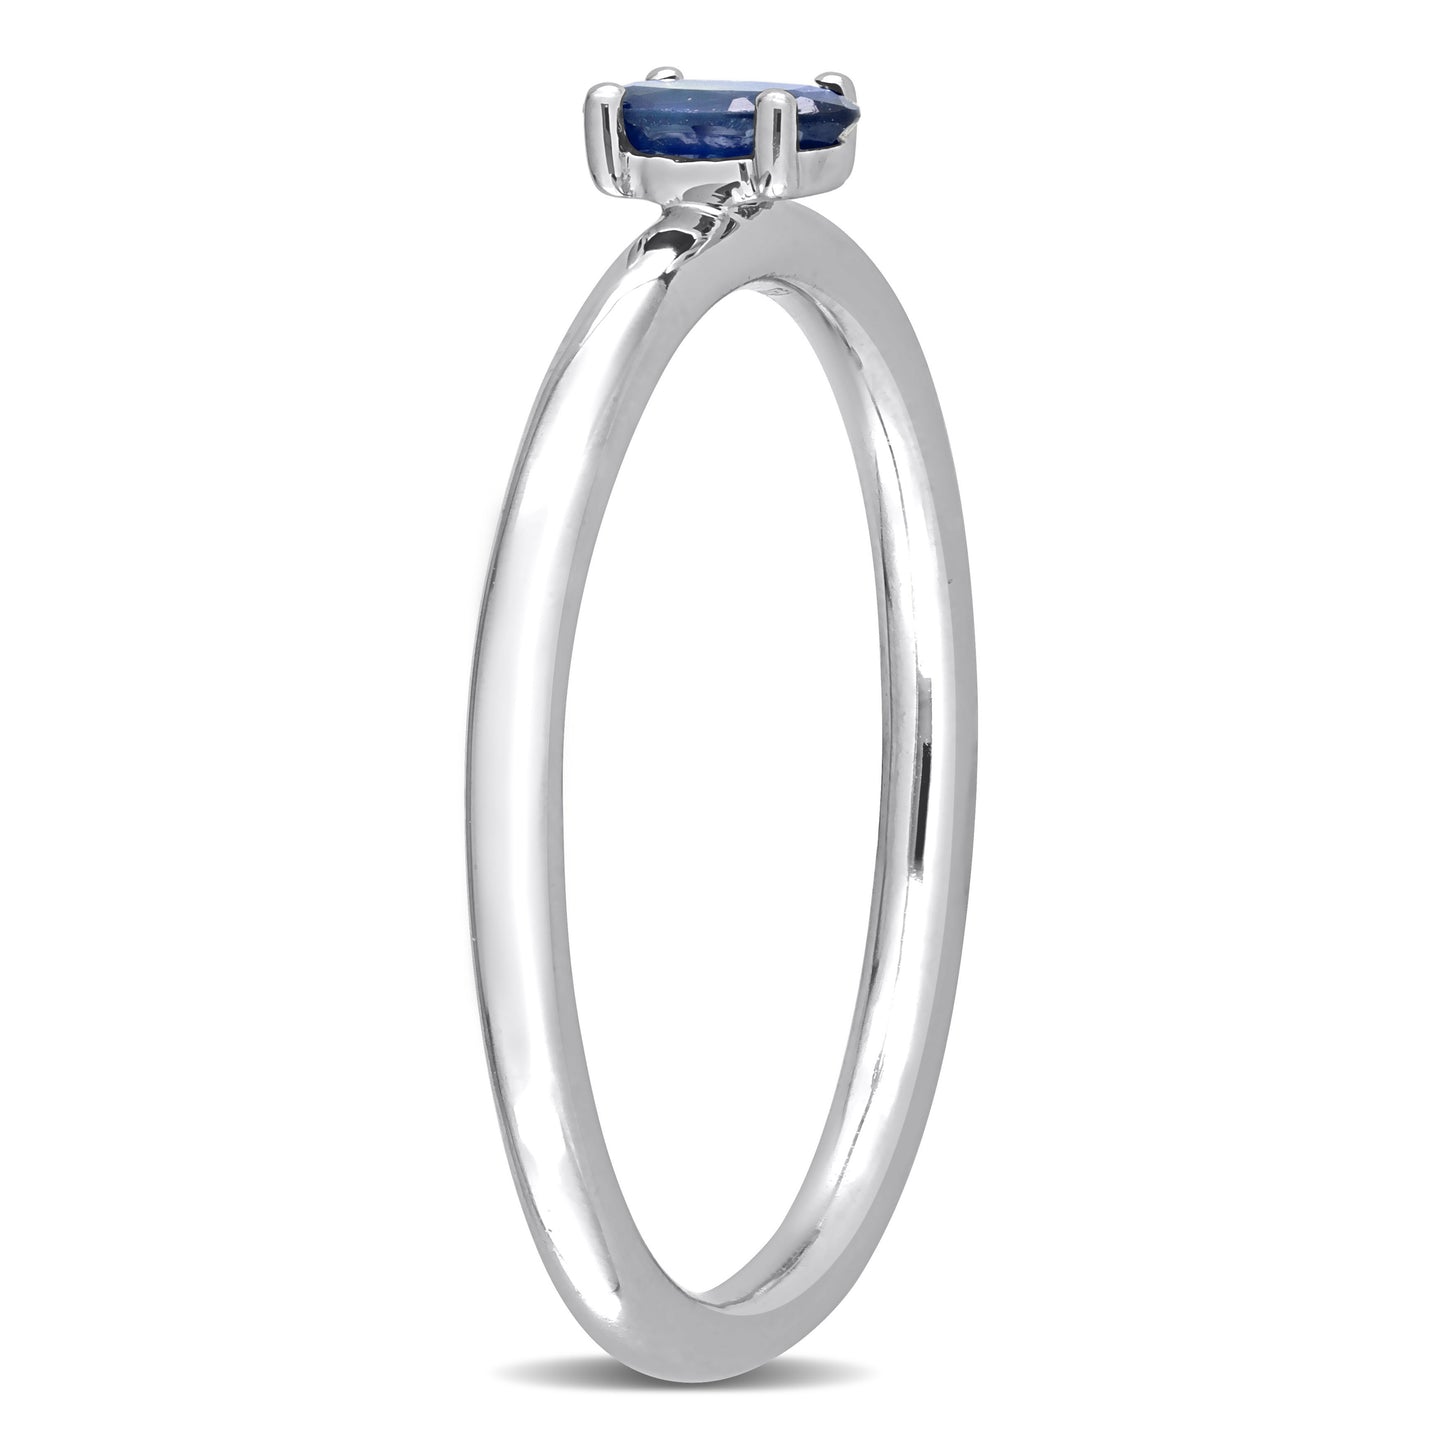 1/3ct Blue Sapphire Solitaire Ring in 10k White Gold